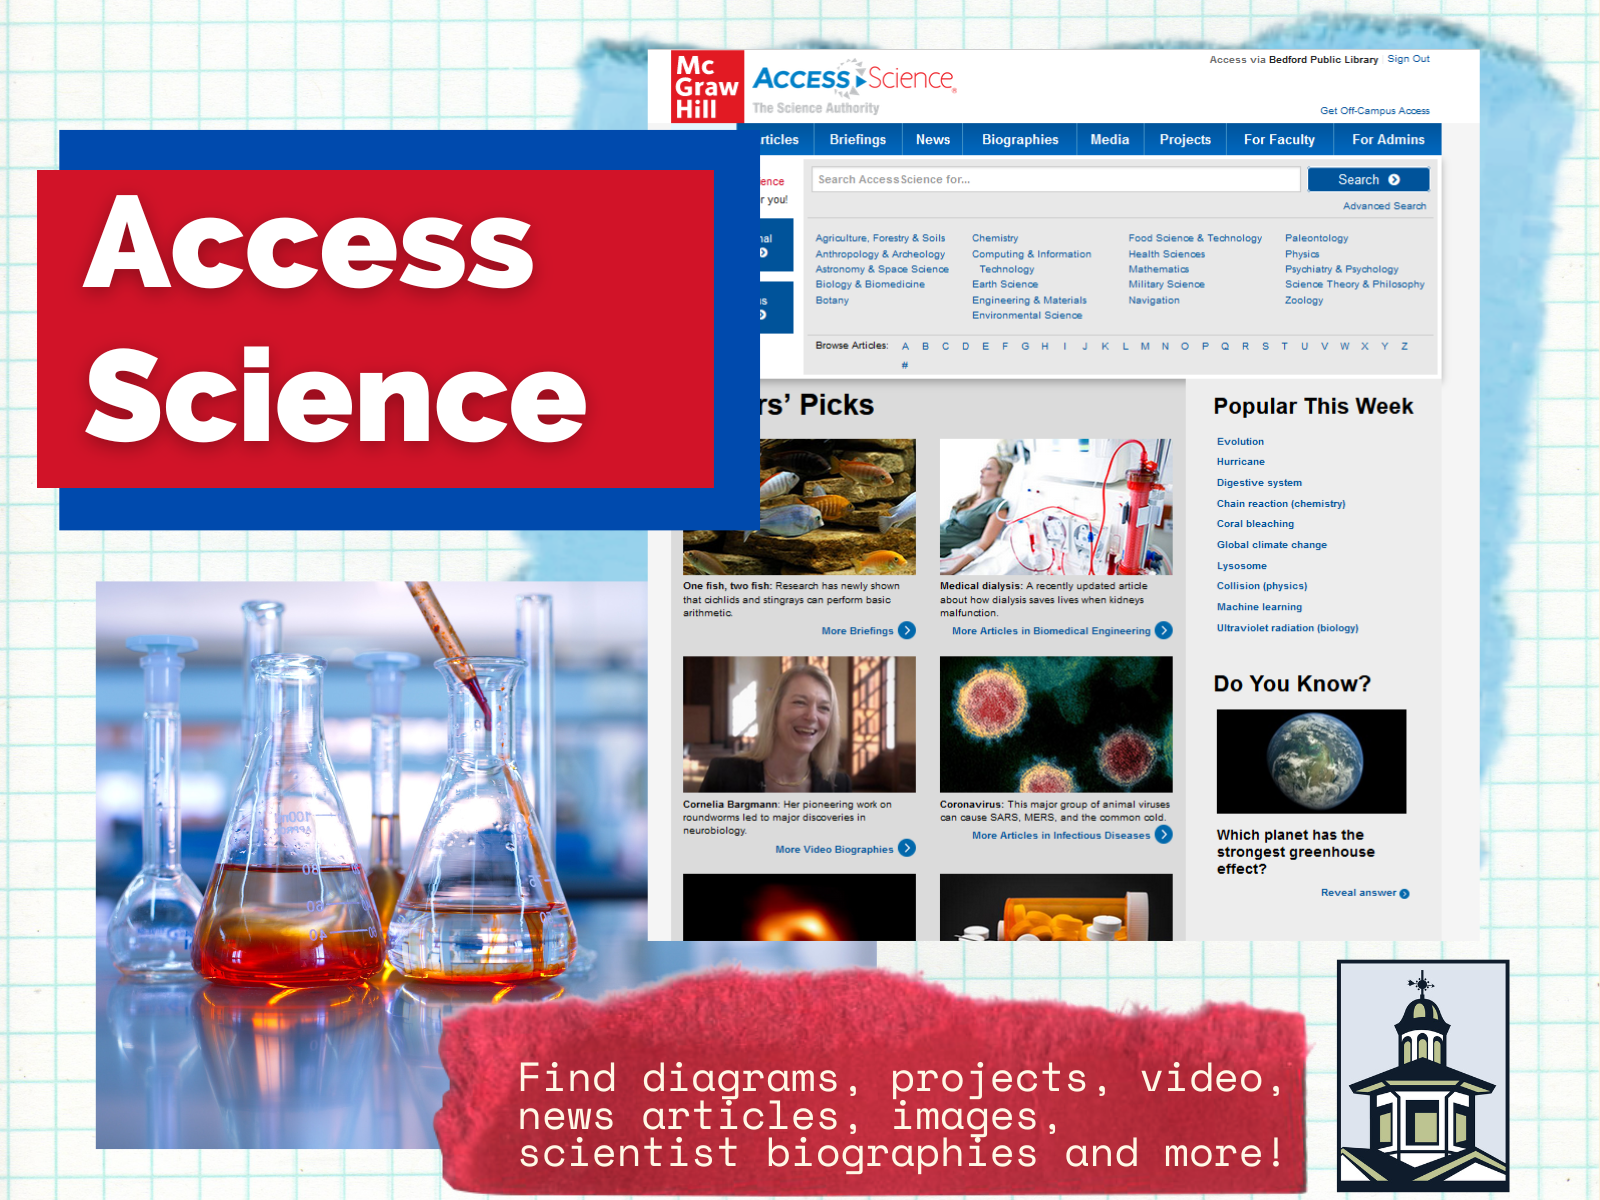 Access Science at the Bedford Public Library